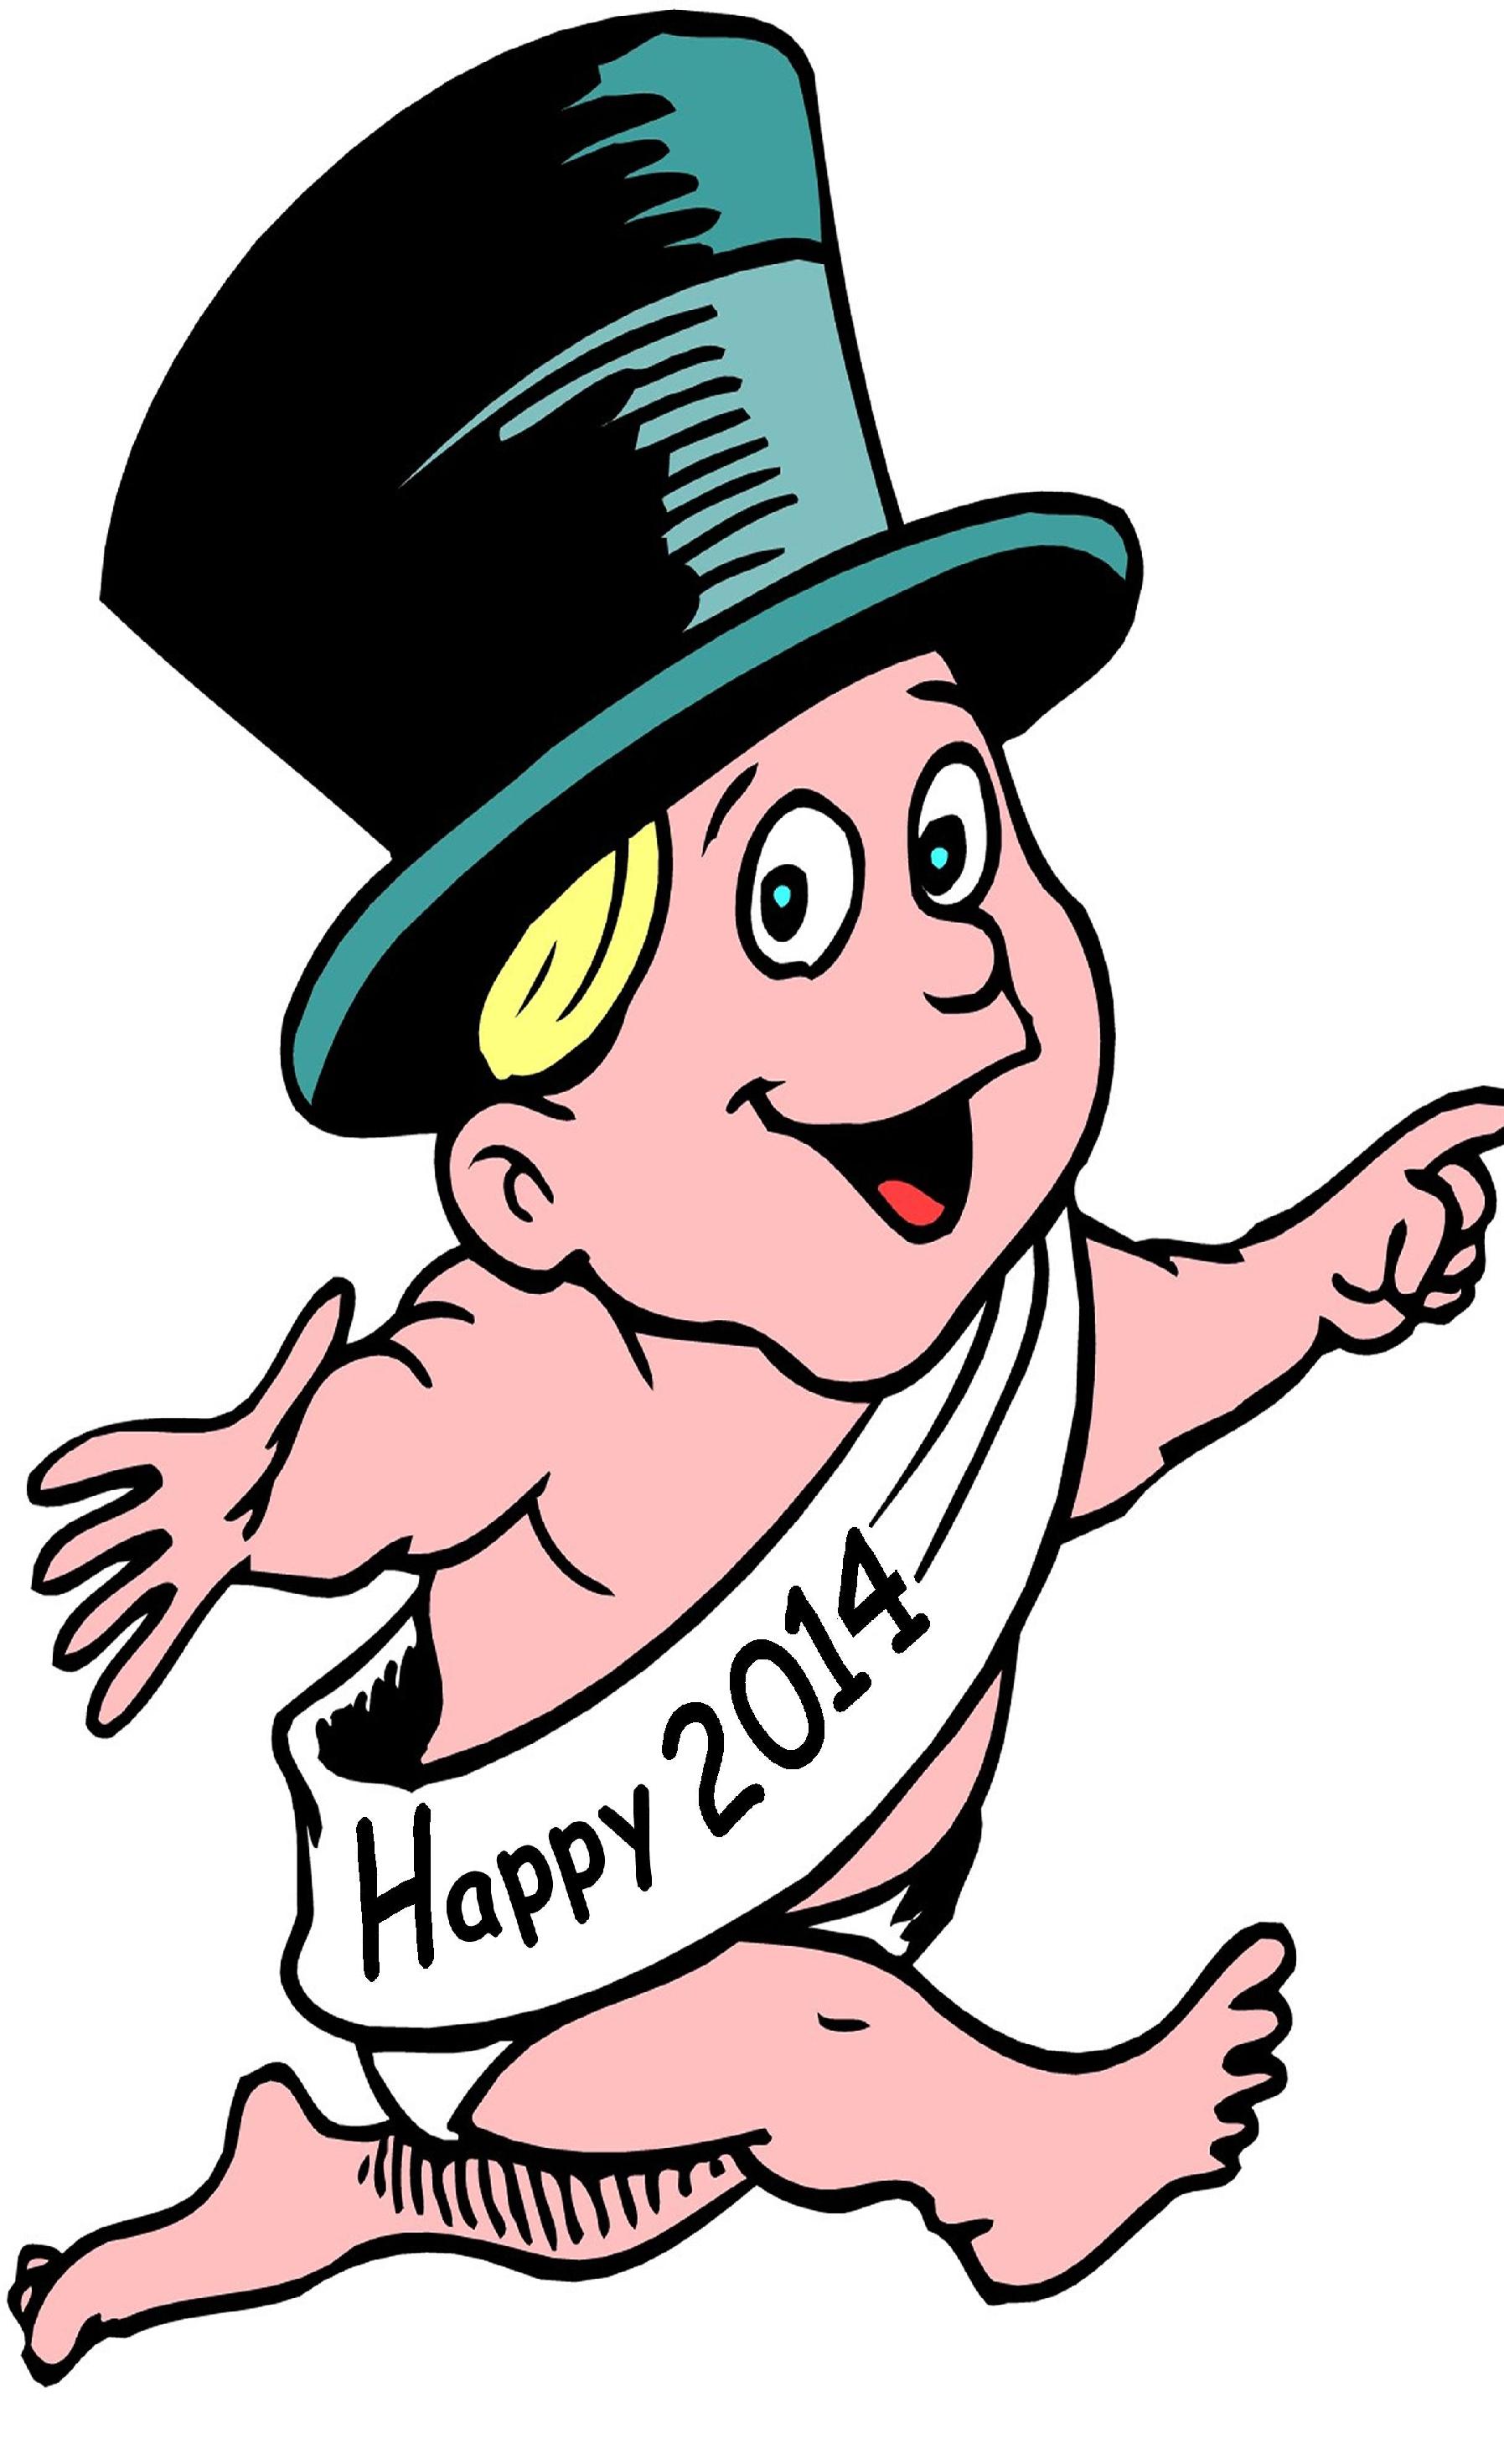 new year's baby clipart - photo #5